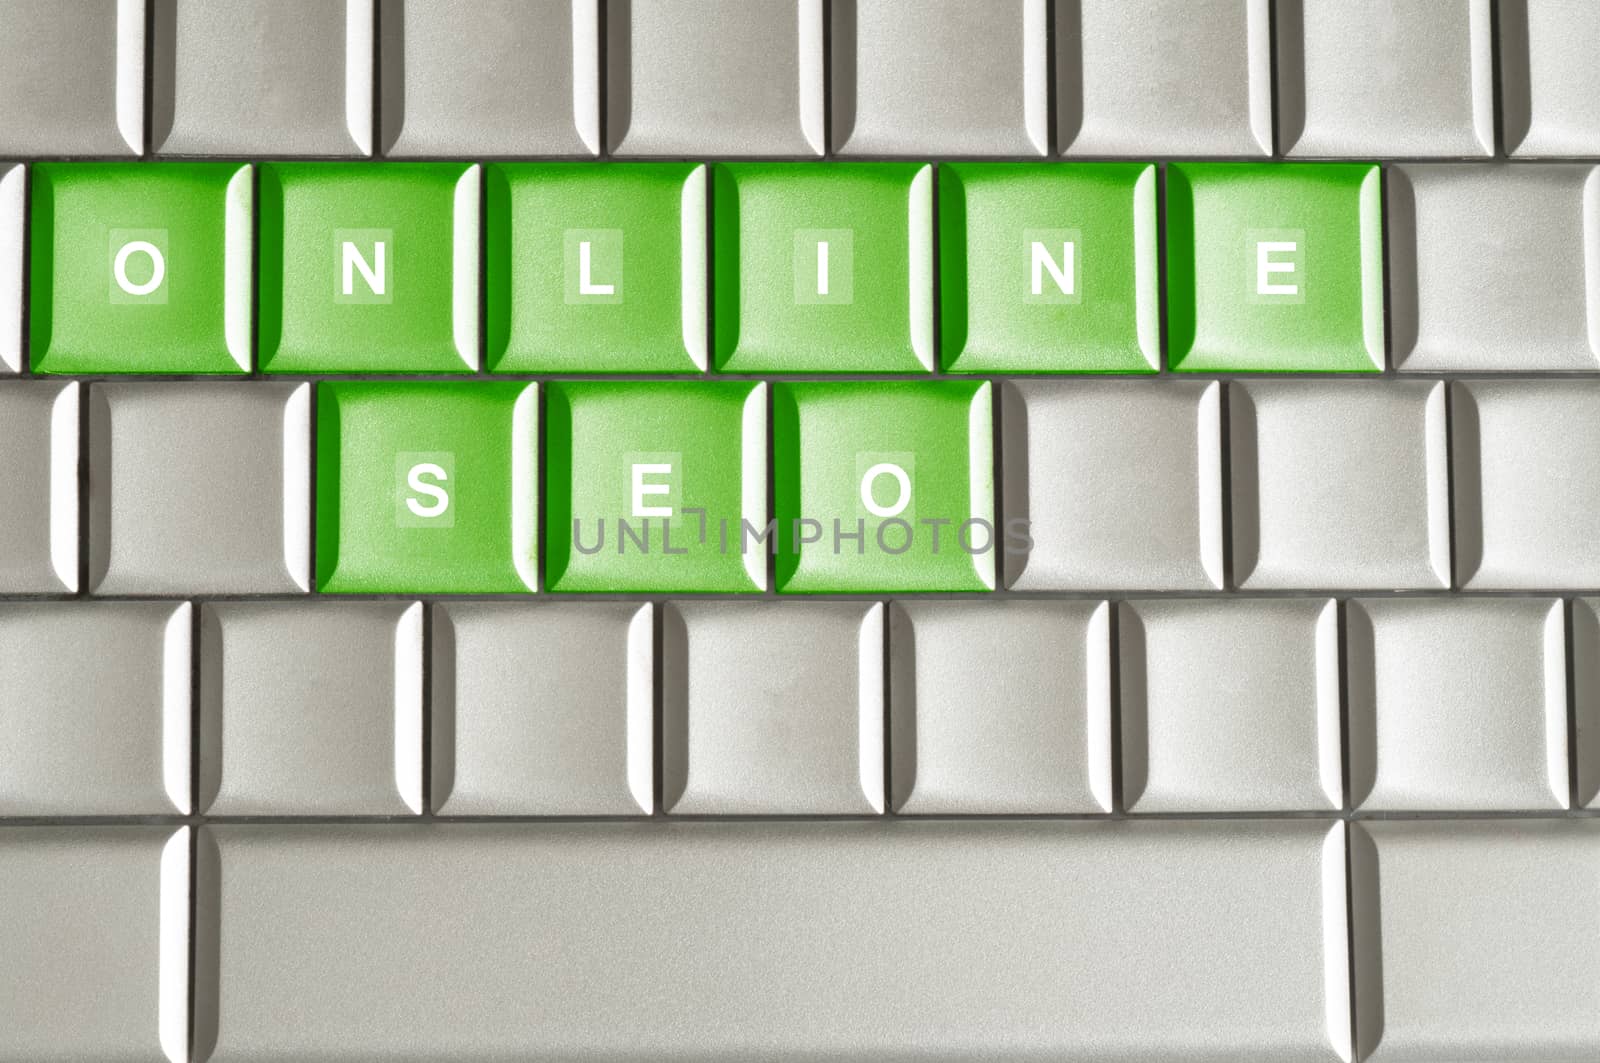 Metallic keyboard with the word ONLINE SEO by daoleduc